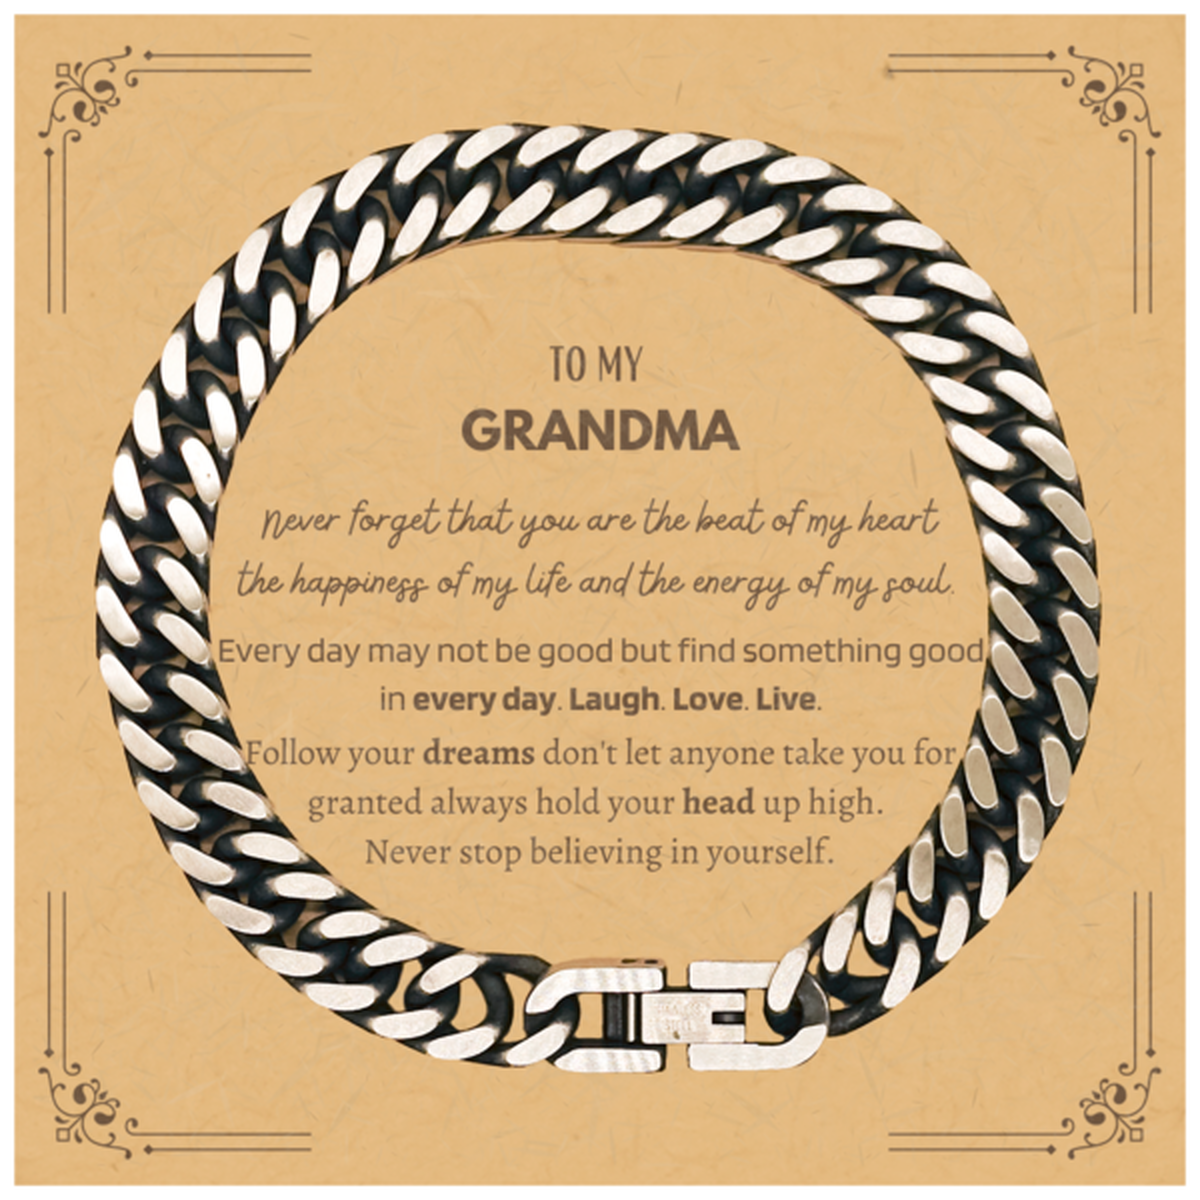 To My Grandma Message Card Gifts, Christmas Grandma Cuban Link Chain Bracelet Present, Birthday Unique Motivational For Grandma, To My Grandma Never forget that you are the beat of my heart the happiness of my life and the energy of my soul